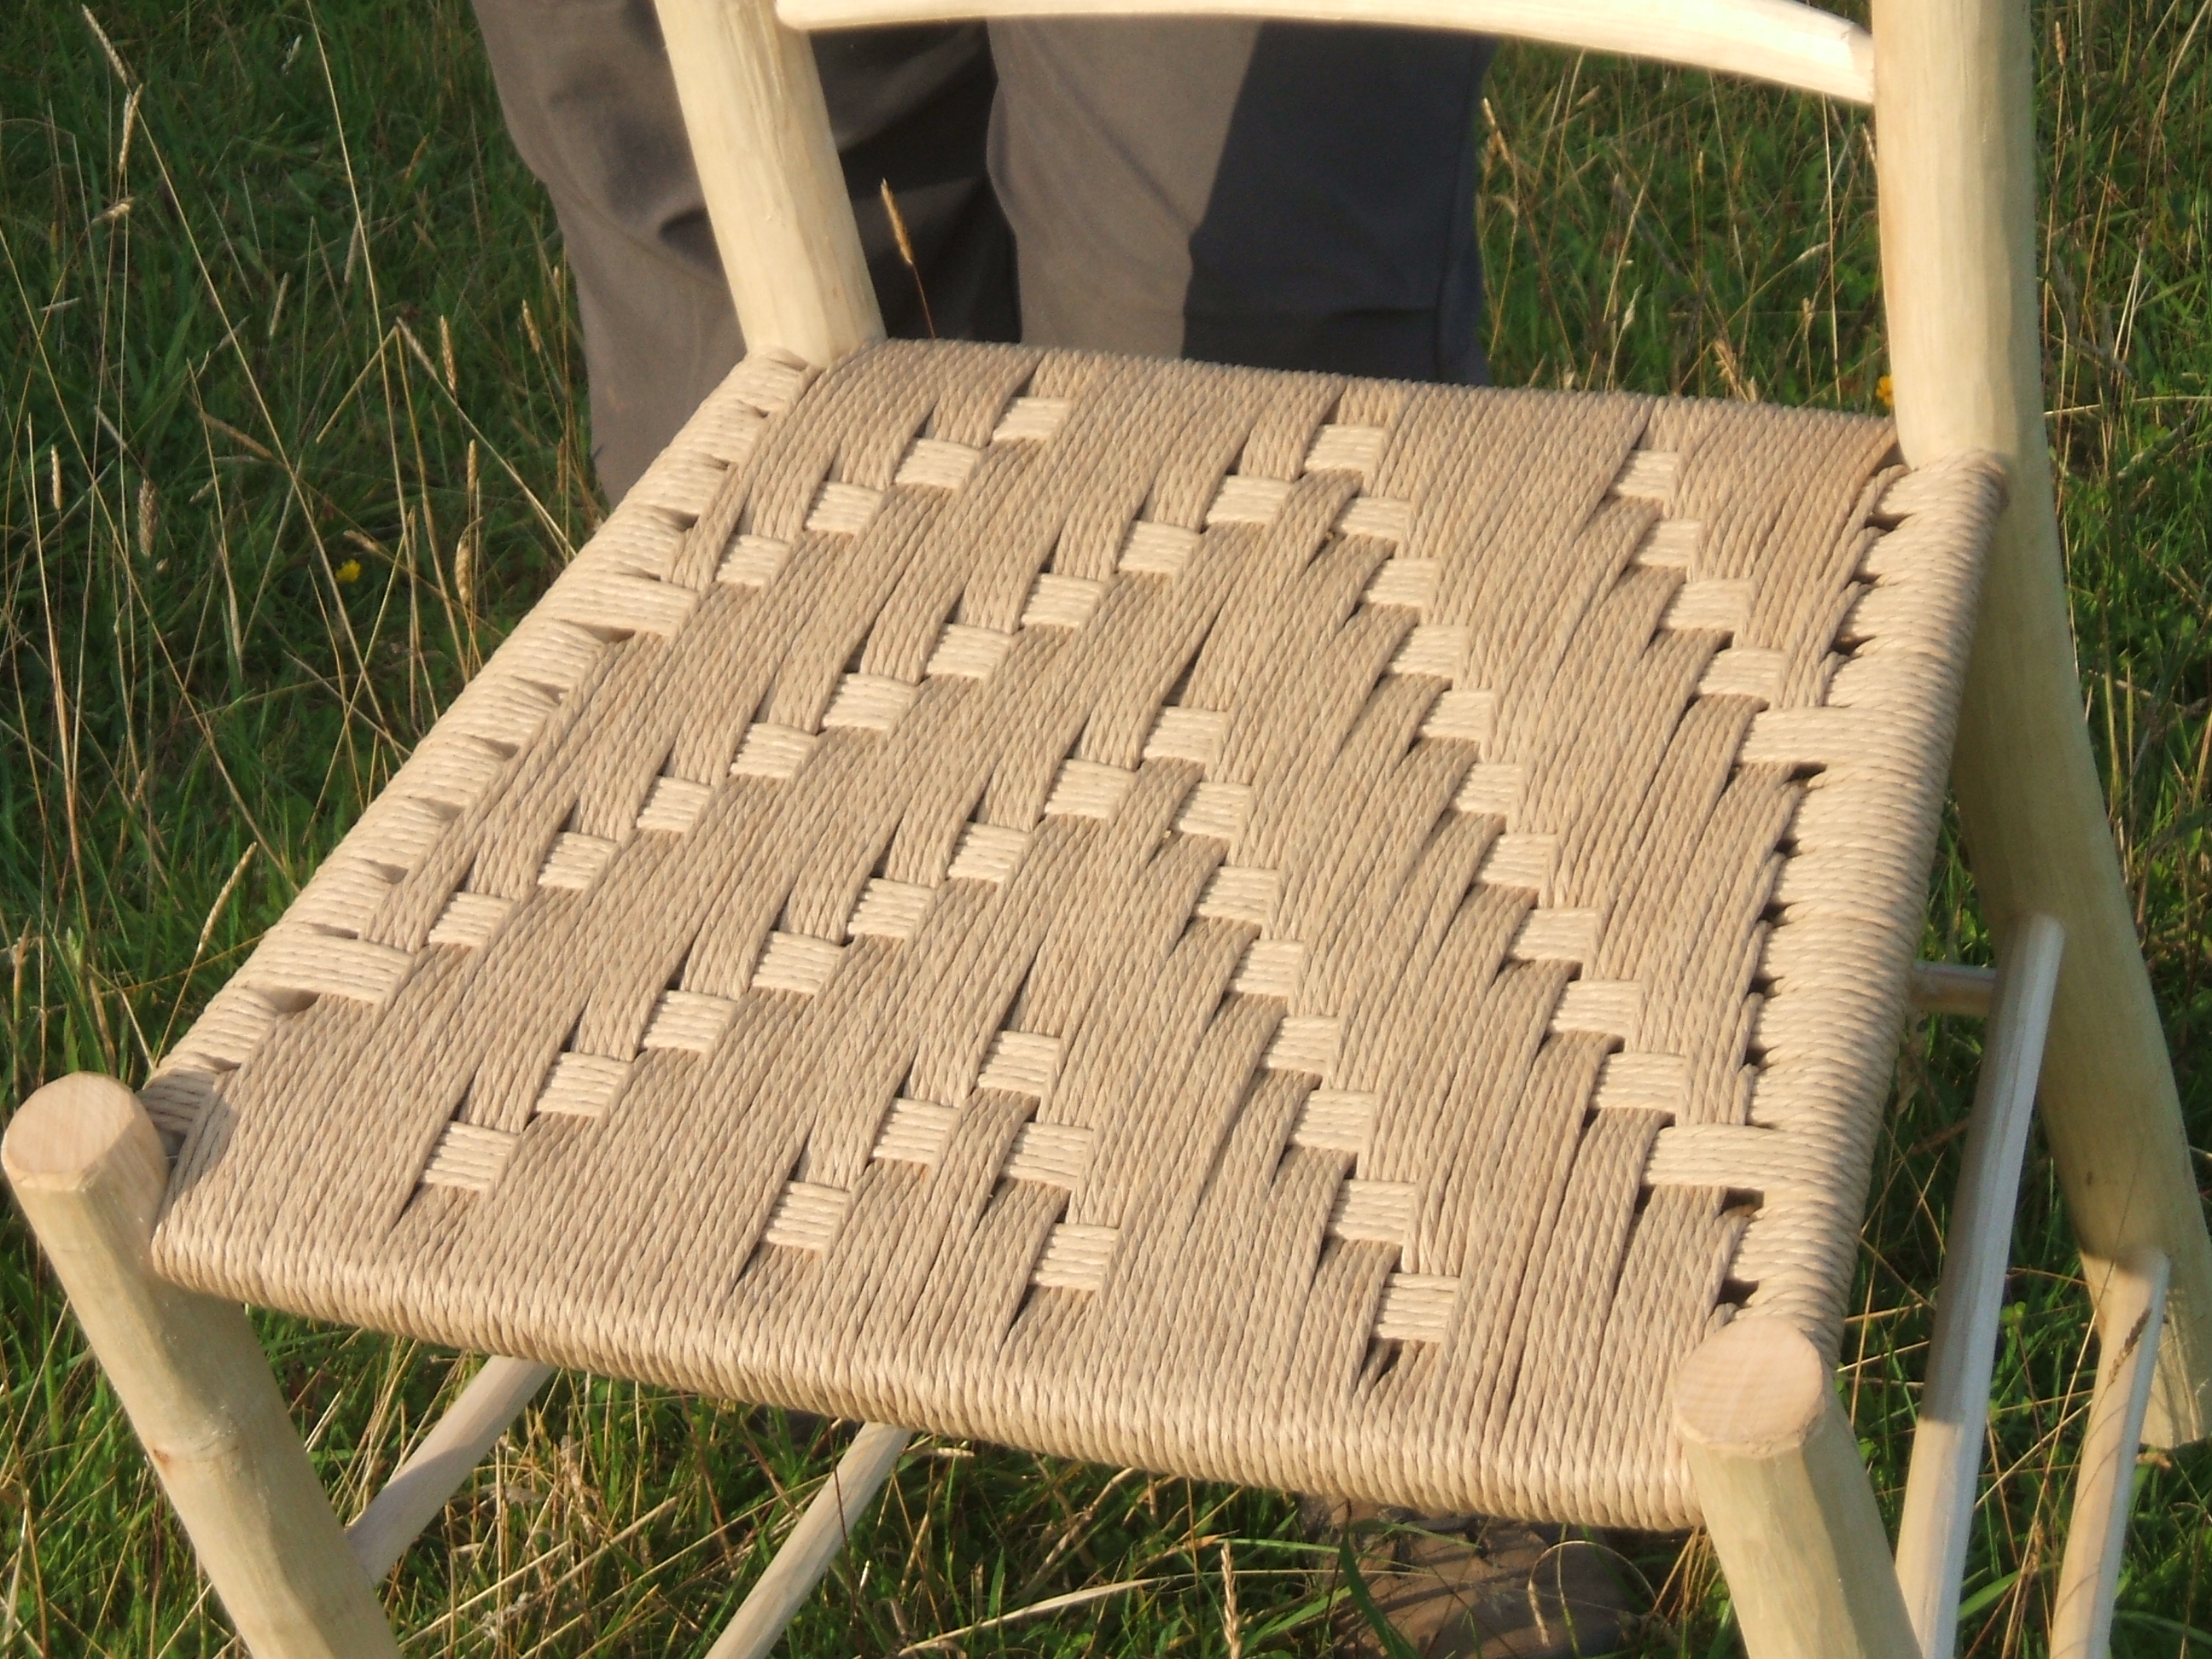 Another woven Irish pattern in natural Danish cord